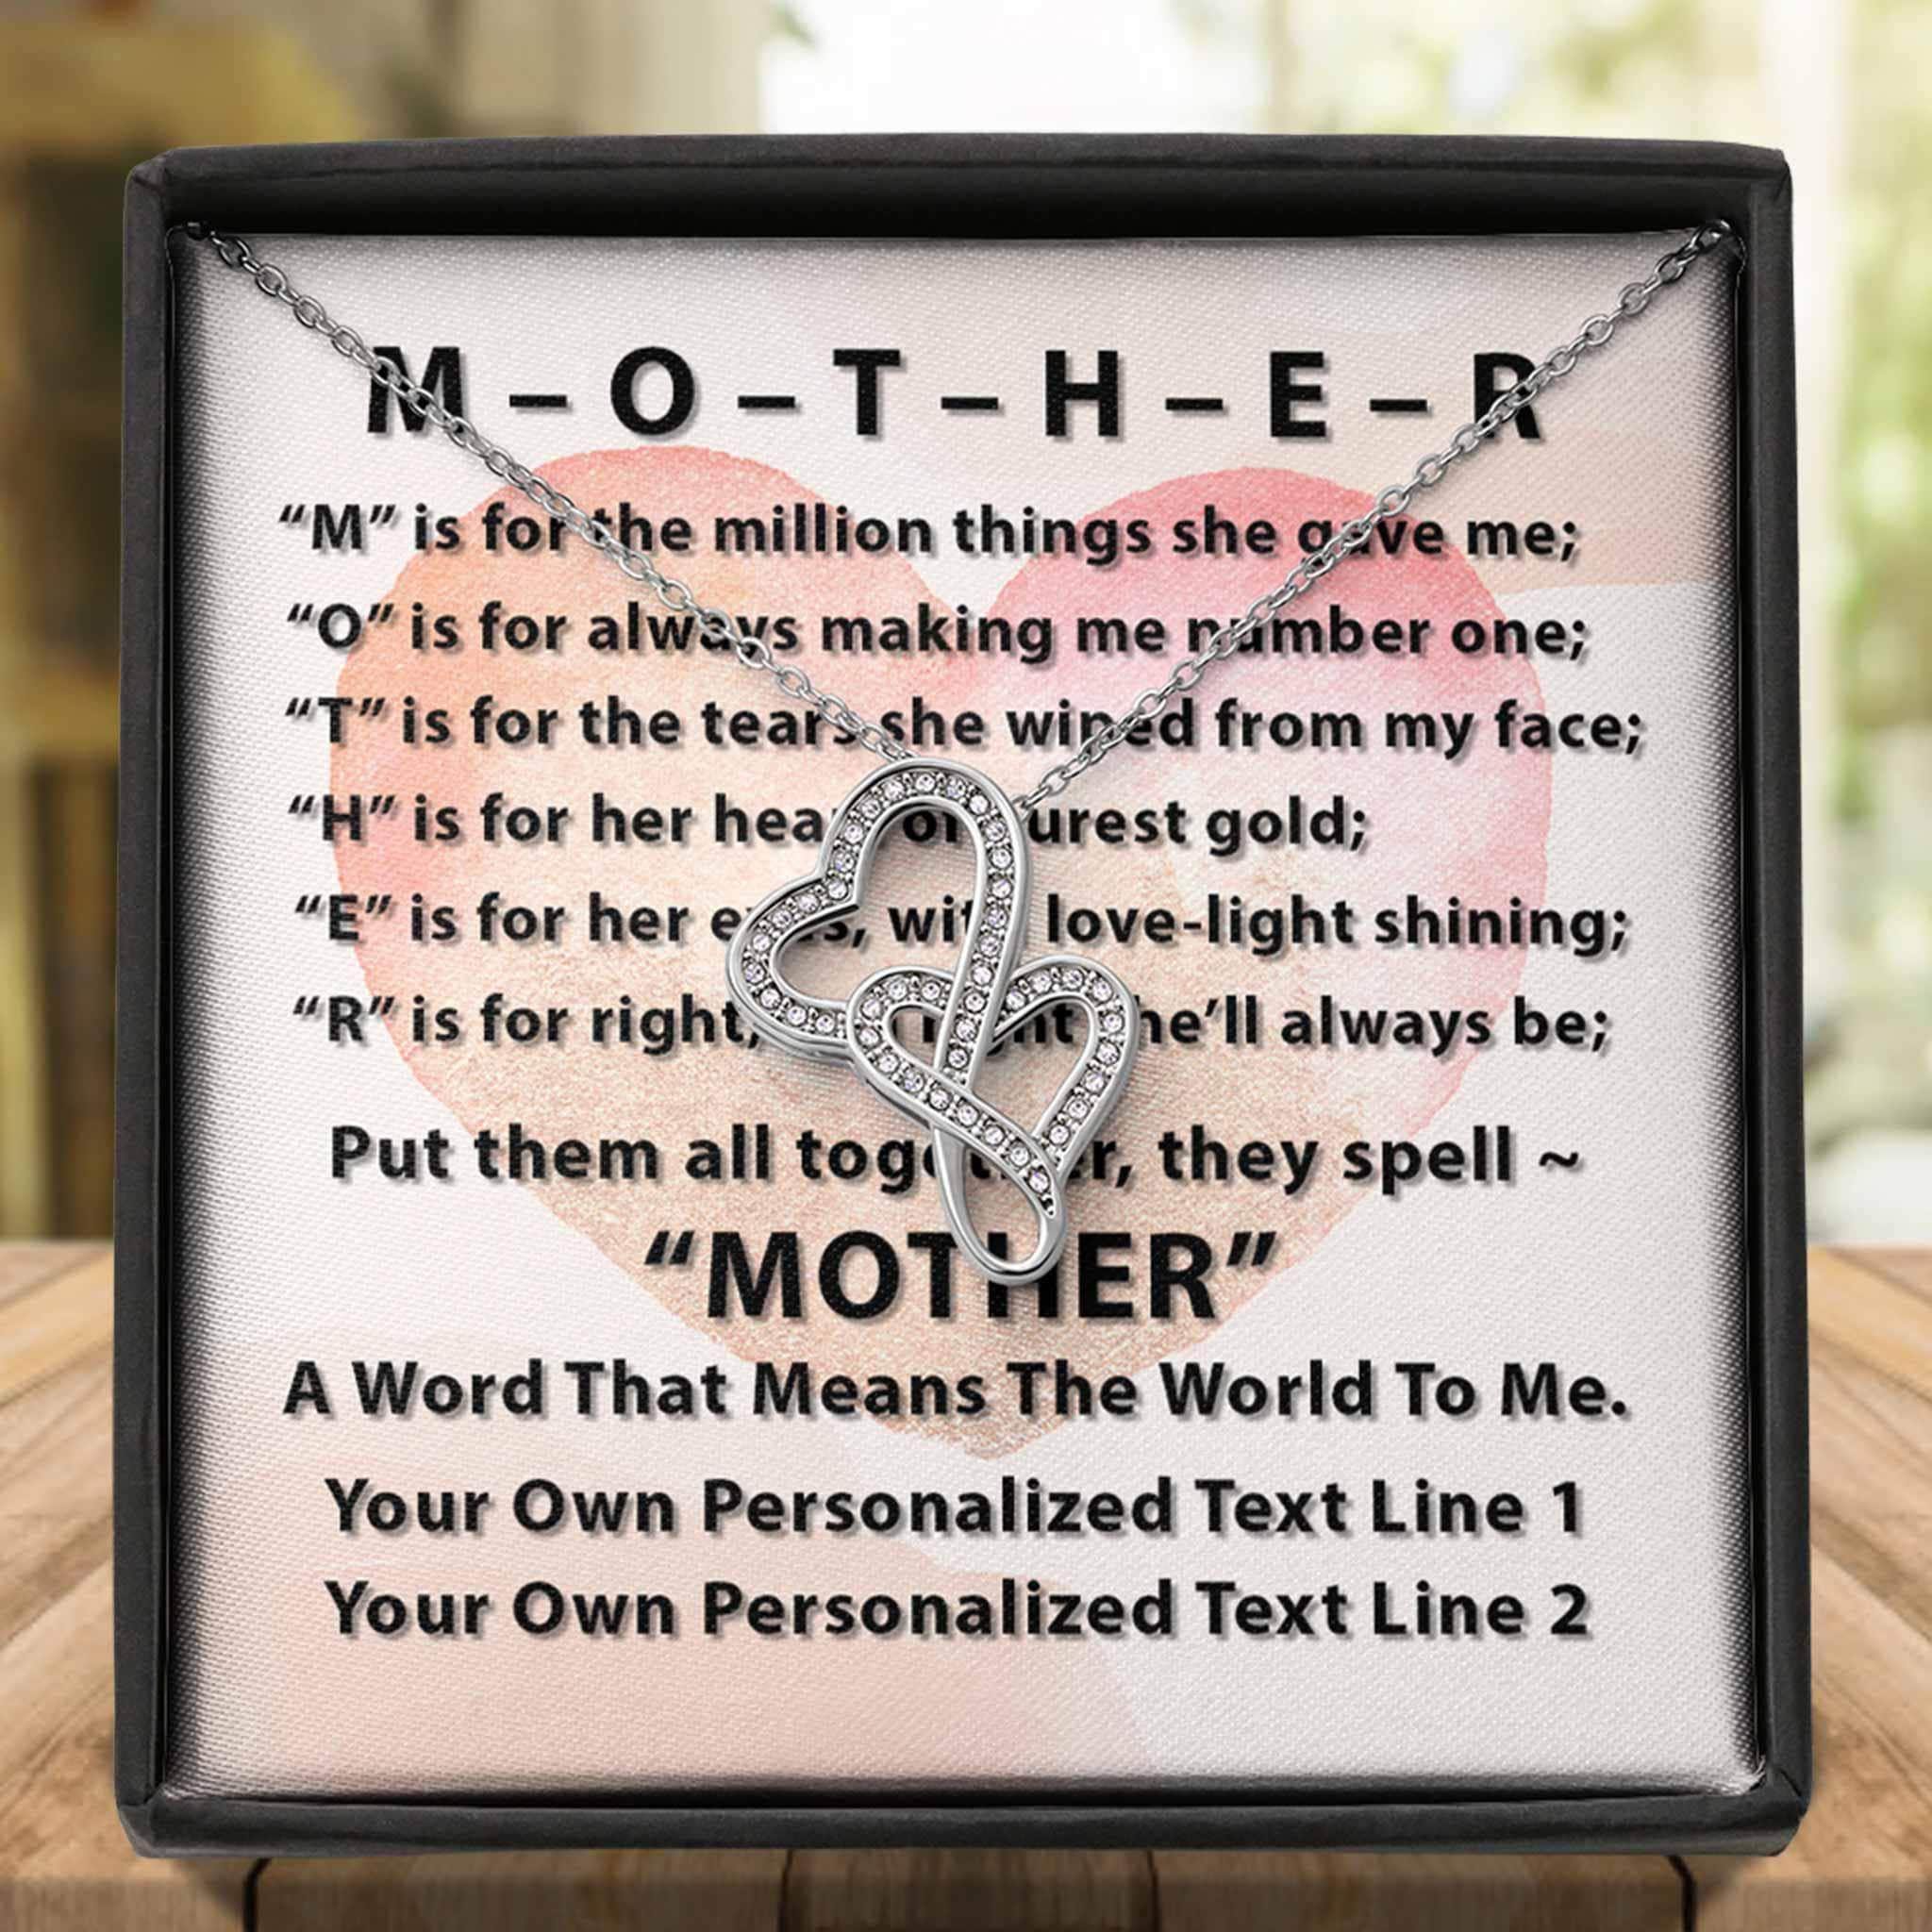 Double Intertwined Hearts Necklace With M-O-T-H-E-R Poem Personalized Mom Insert CardCustomly Gifts